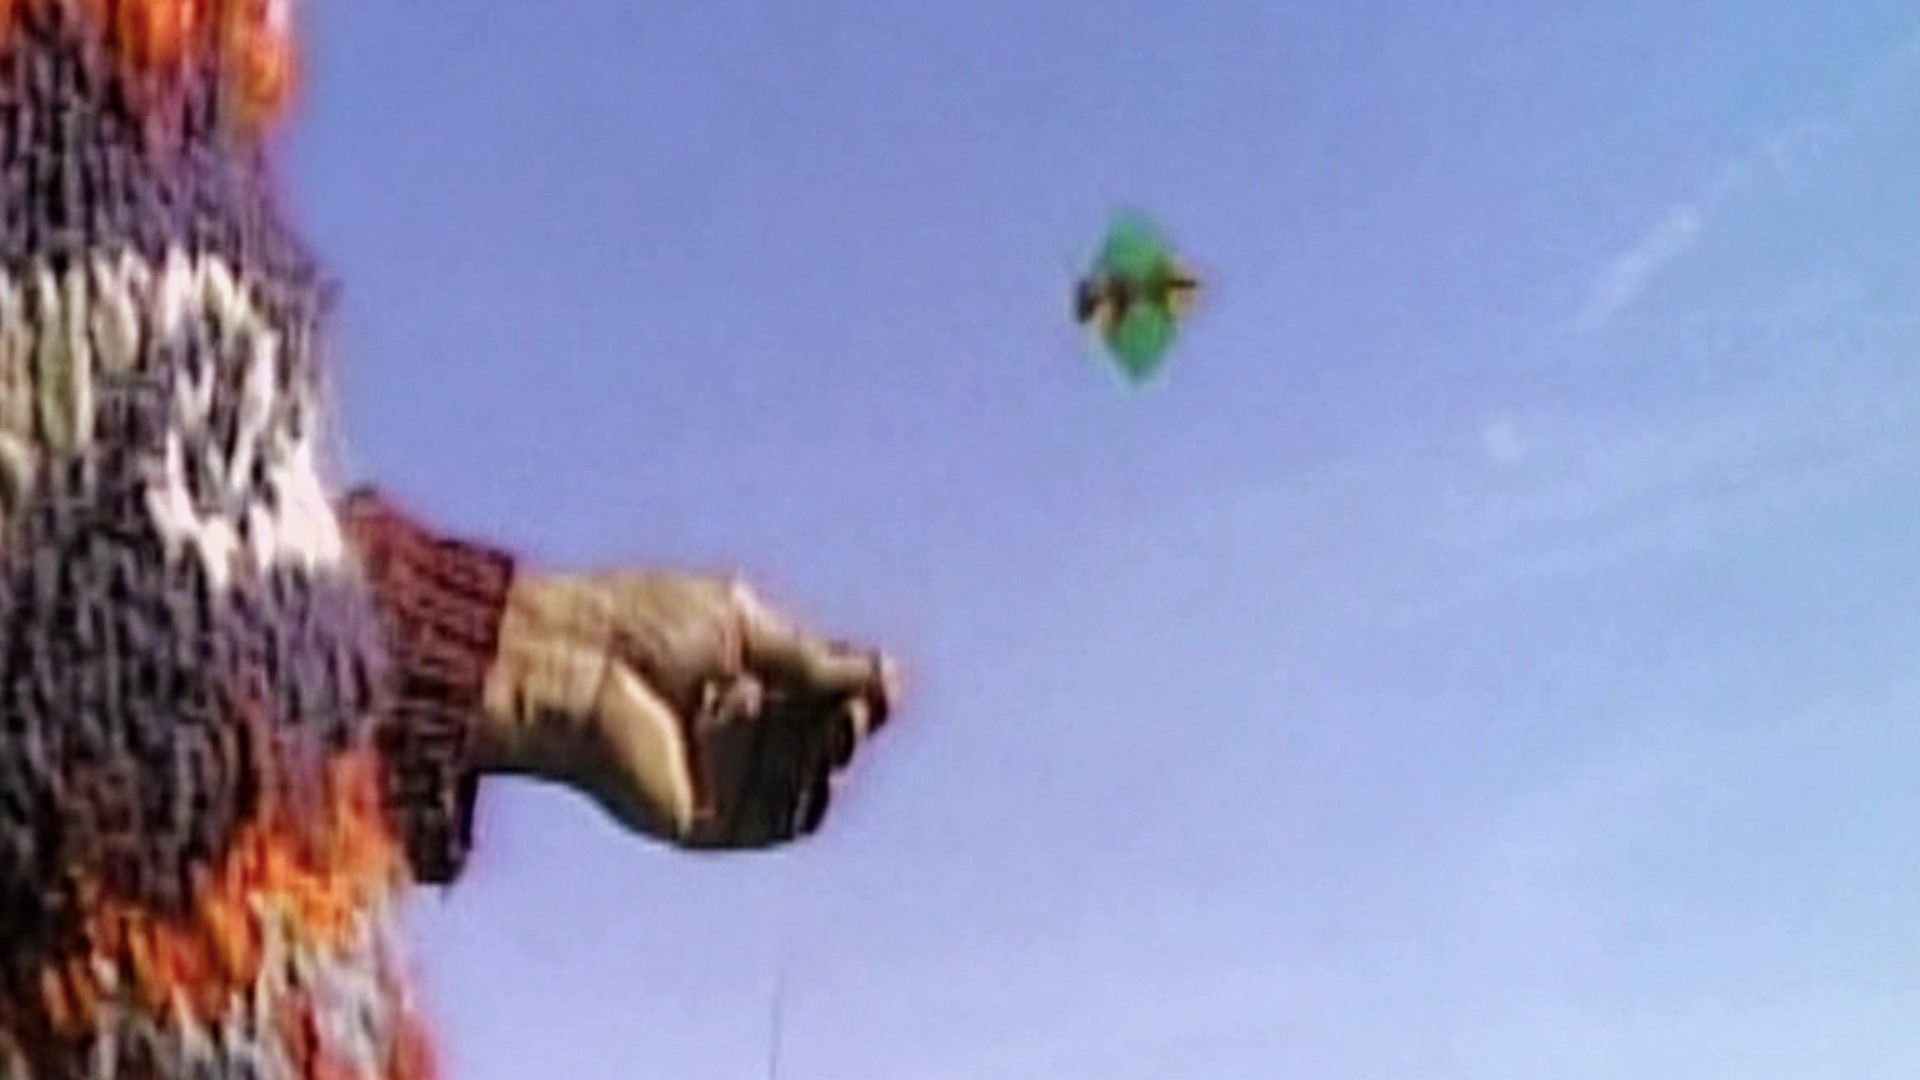 In 1987, Mike Stevens met a man who shared the simple magic of flying a kite.